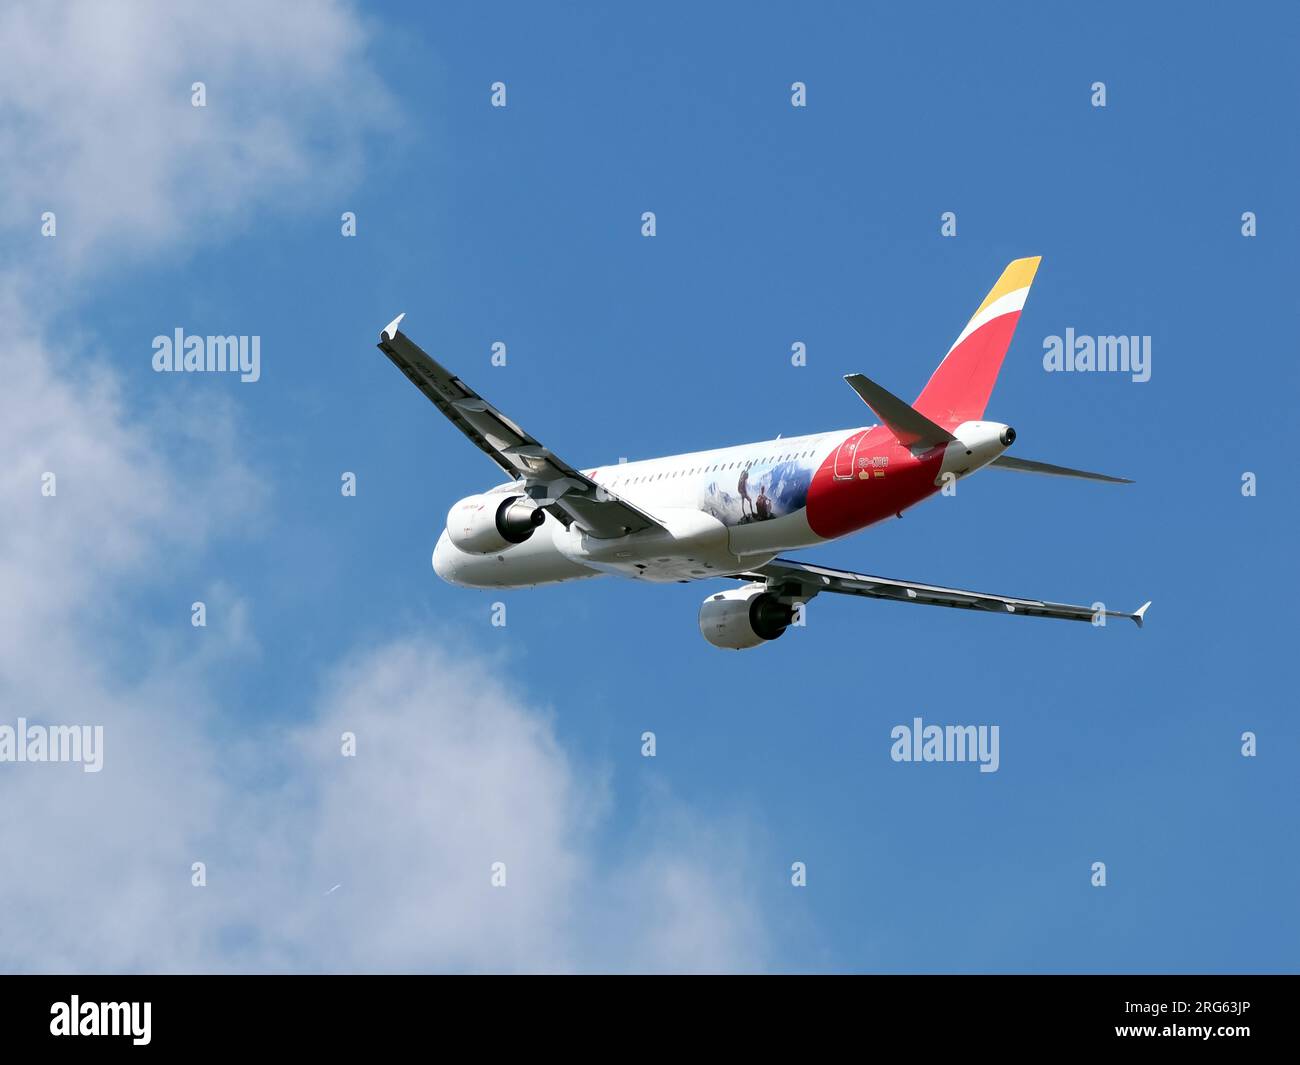 Iberia Airlines (is the flag carrier airline of Spain), Airbus A319-111 airplane, Cargo hill, Budapest, Magyarország, Hungary Stock Photo